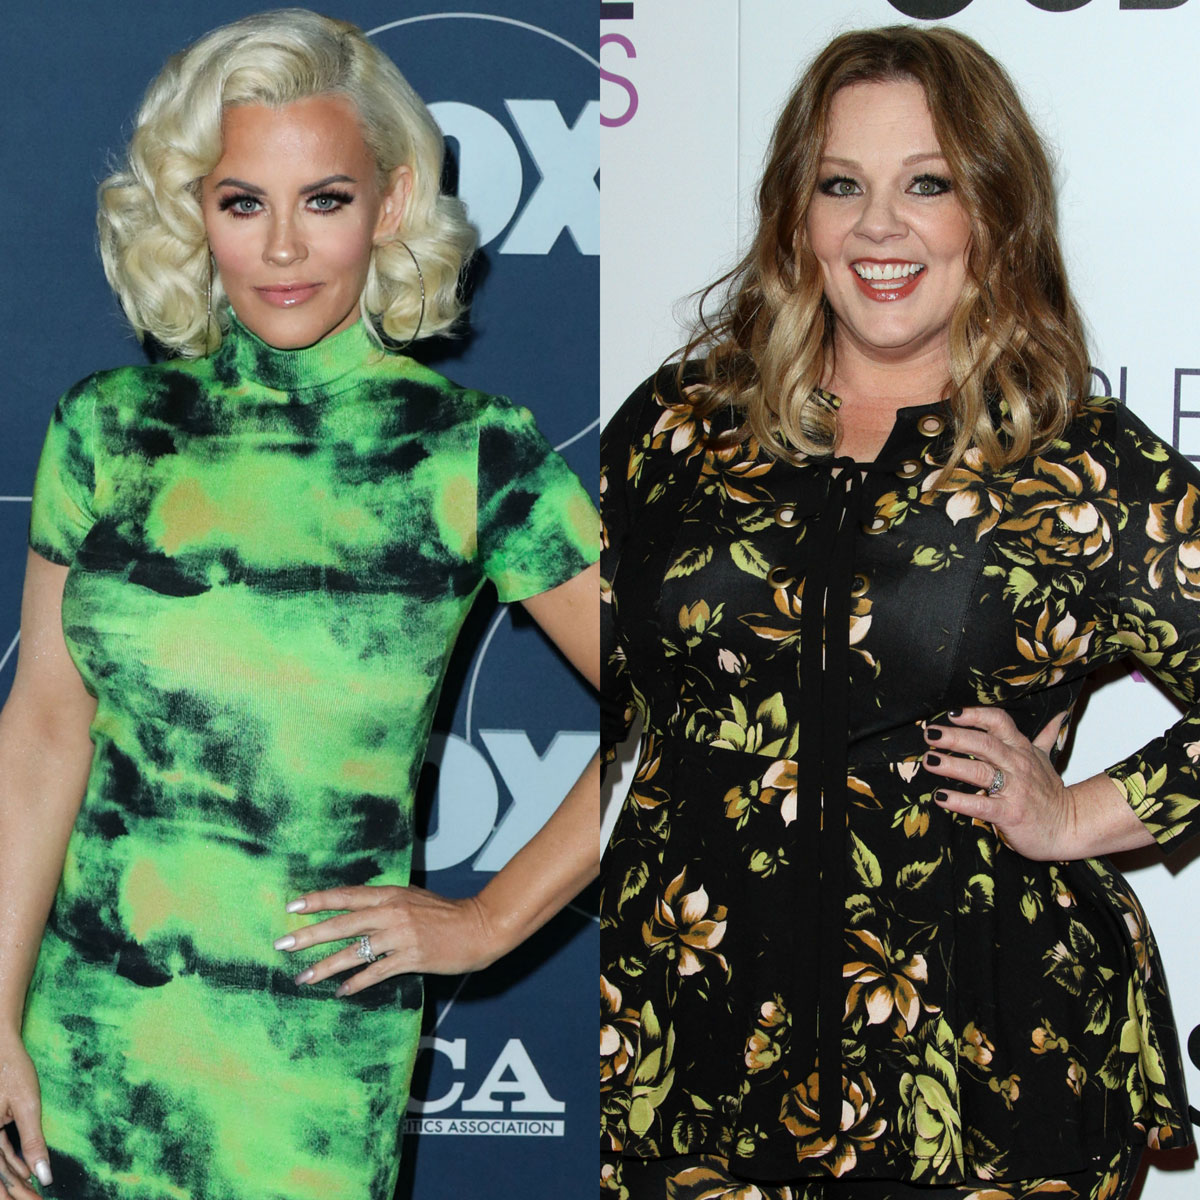 Jenny McCarthy and Melissa McCarthy are related